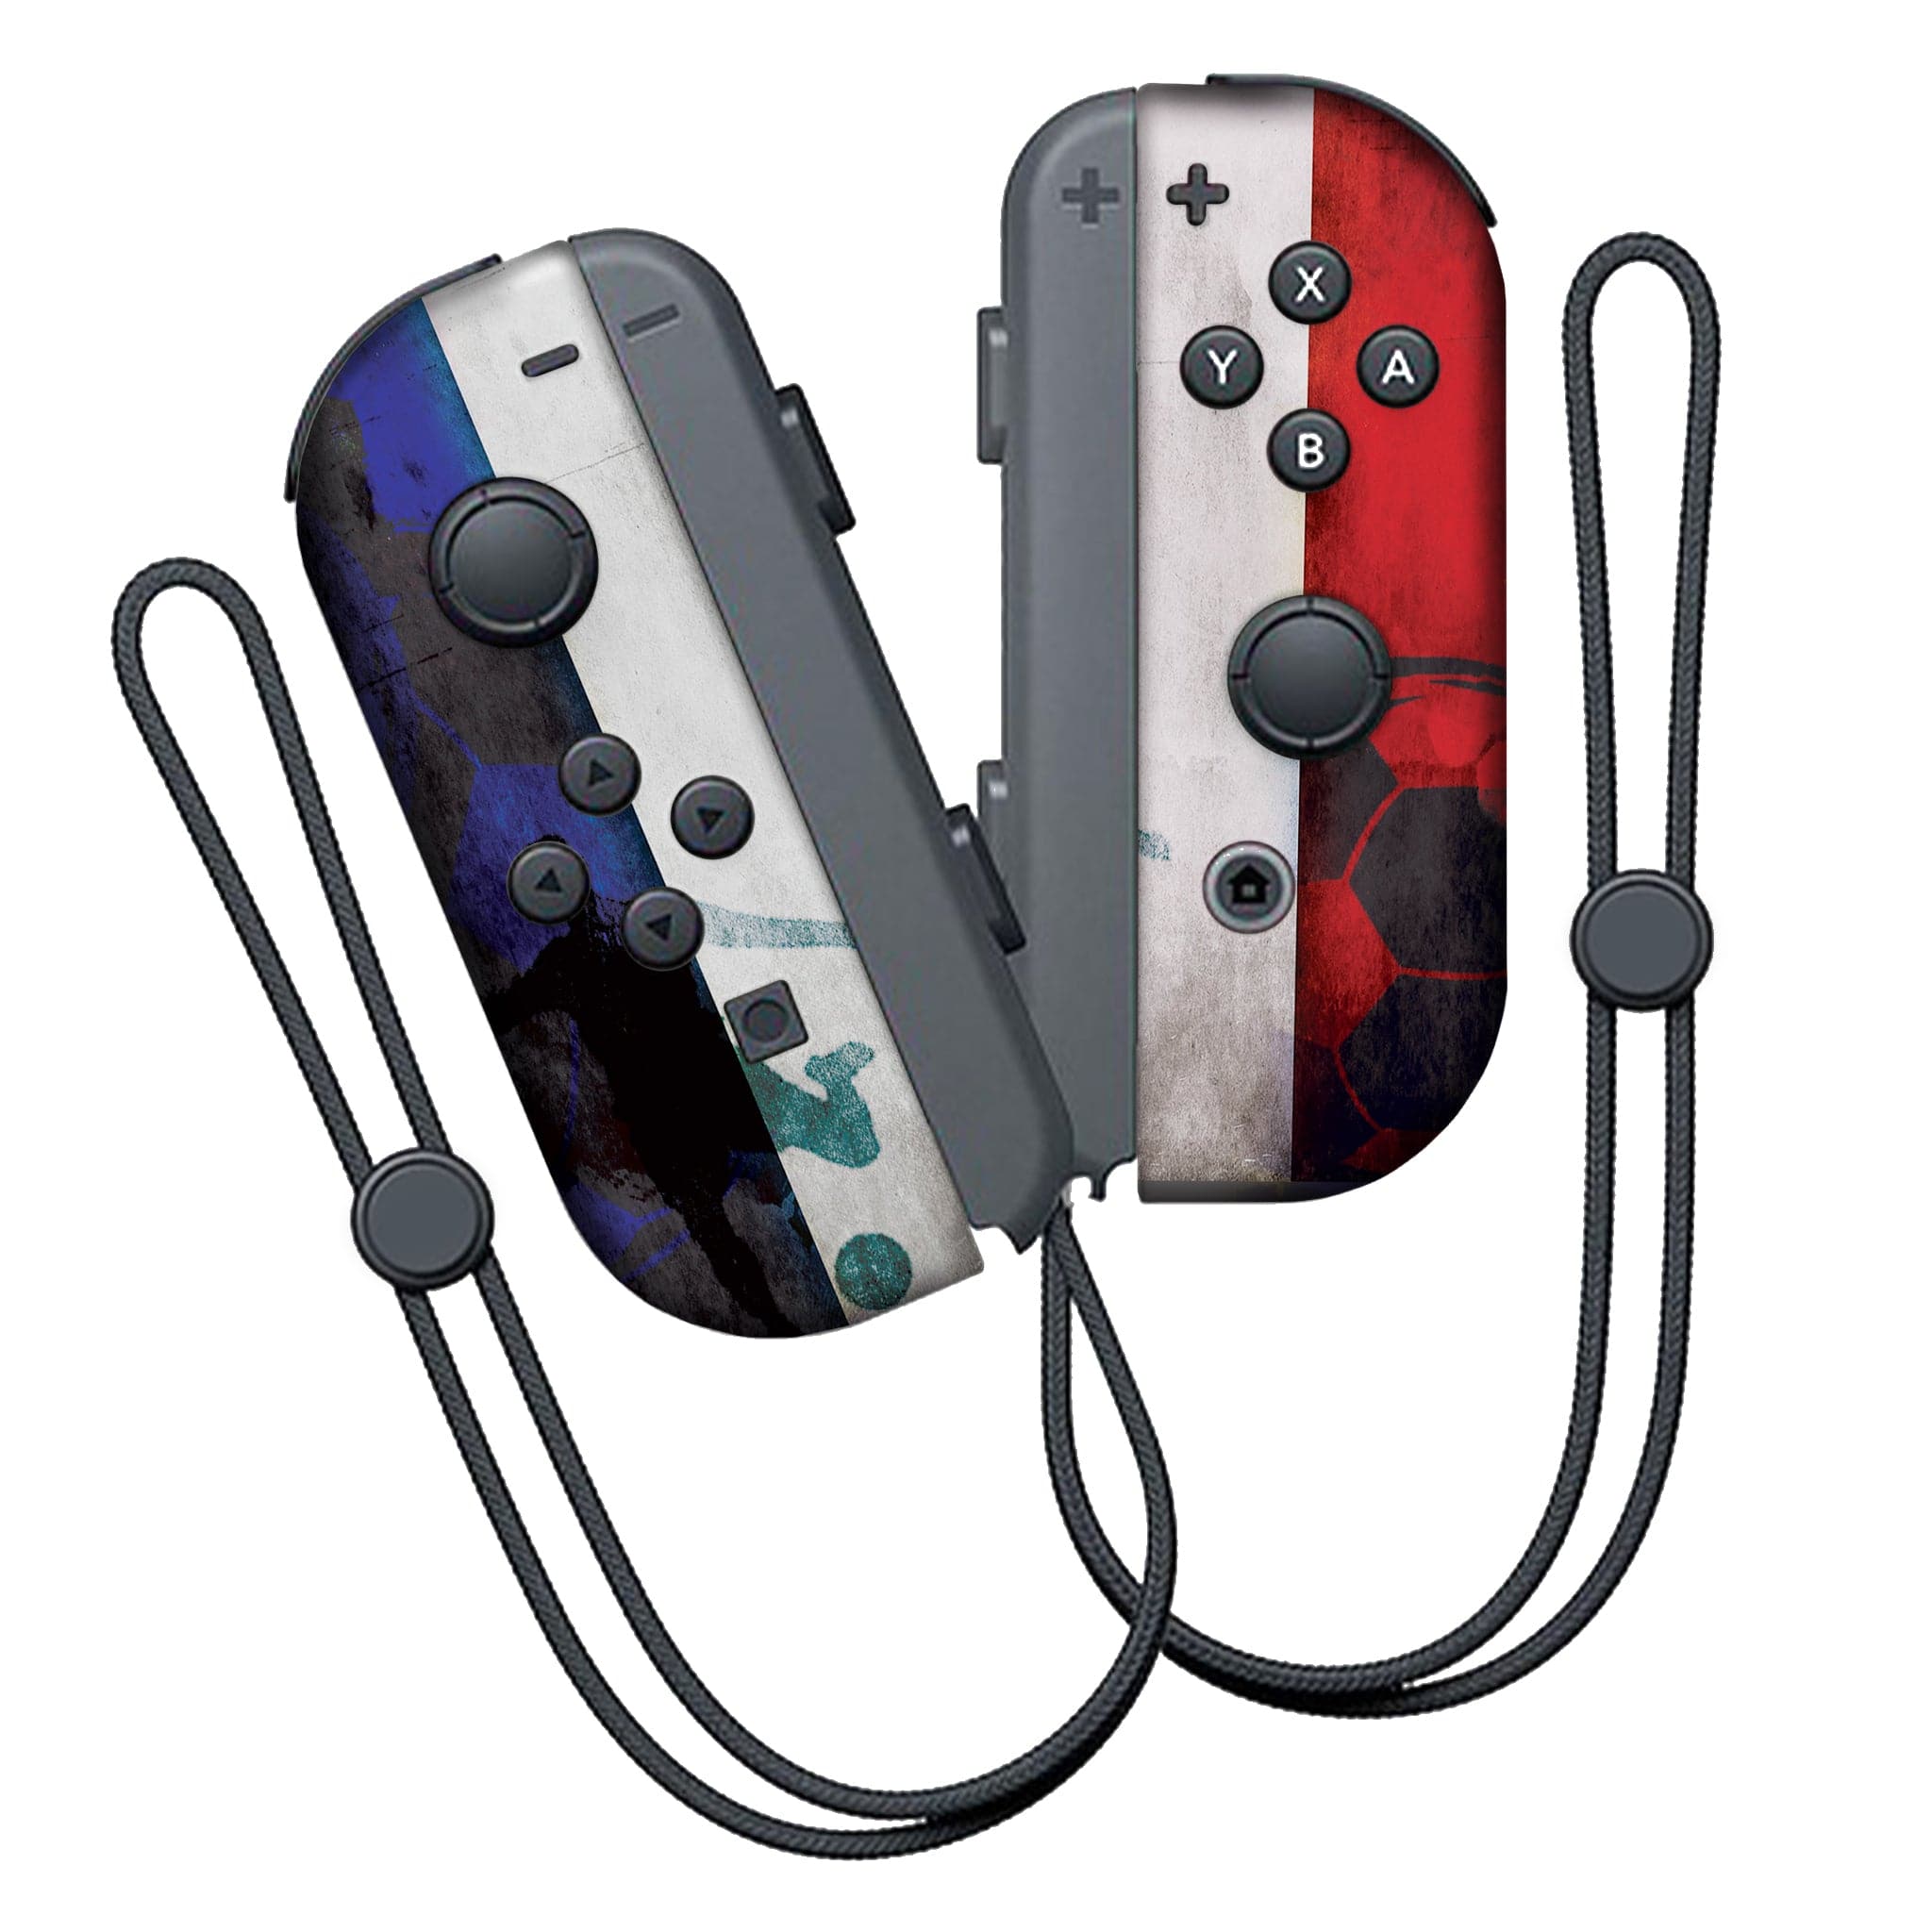 Nintendo Switch Joy-Con controllers could work on Mac, PC - Science & Tech  - The Jakarta Post